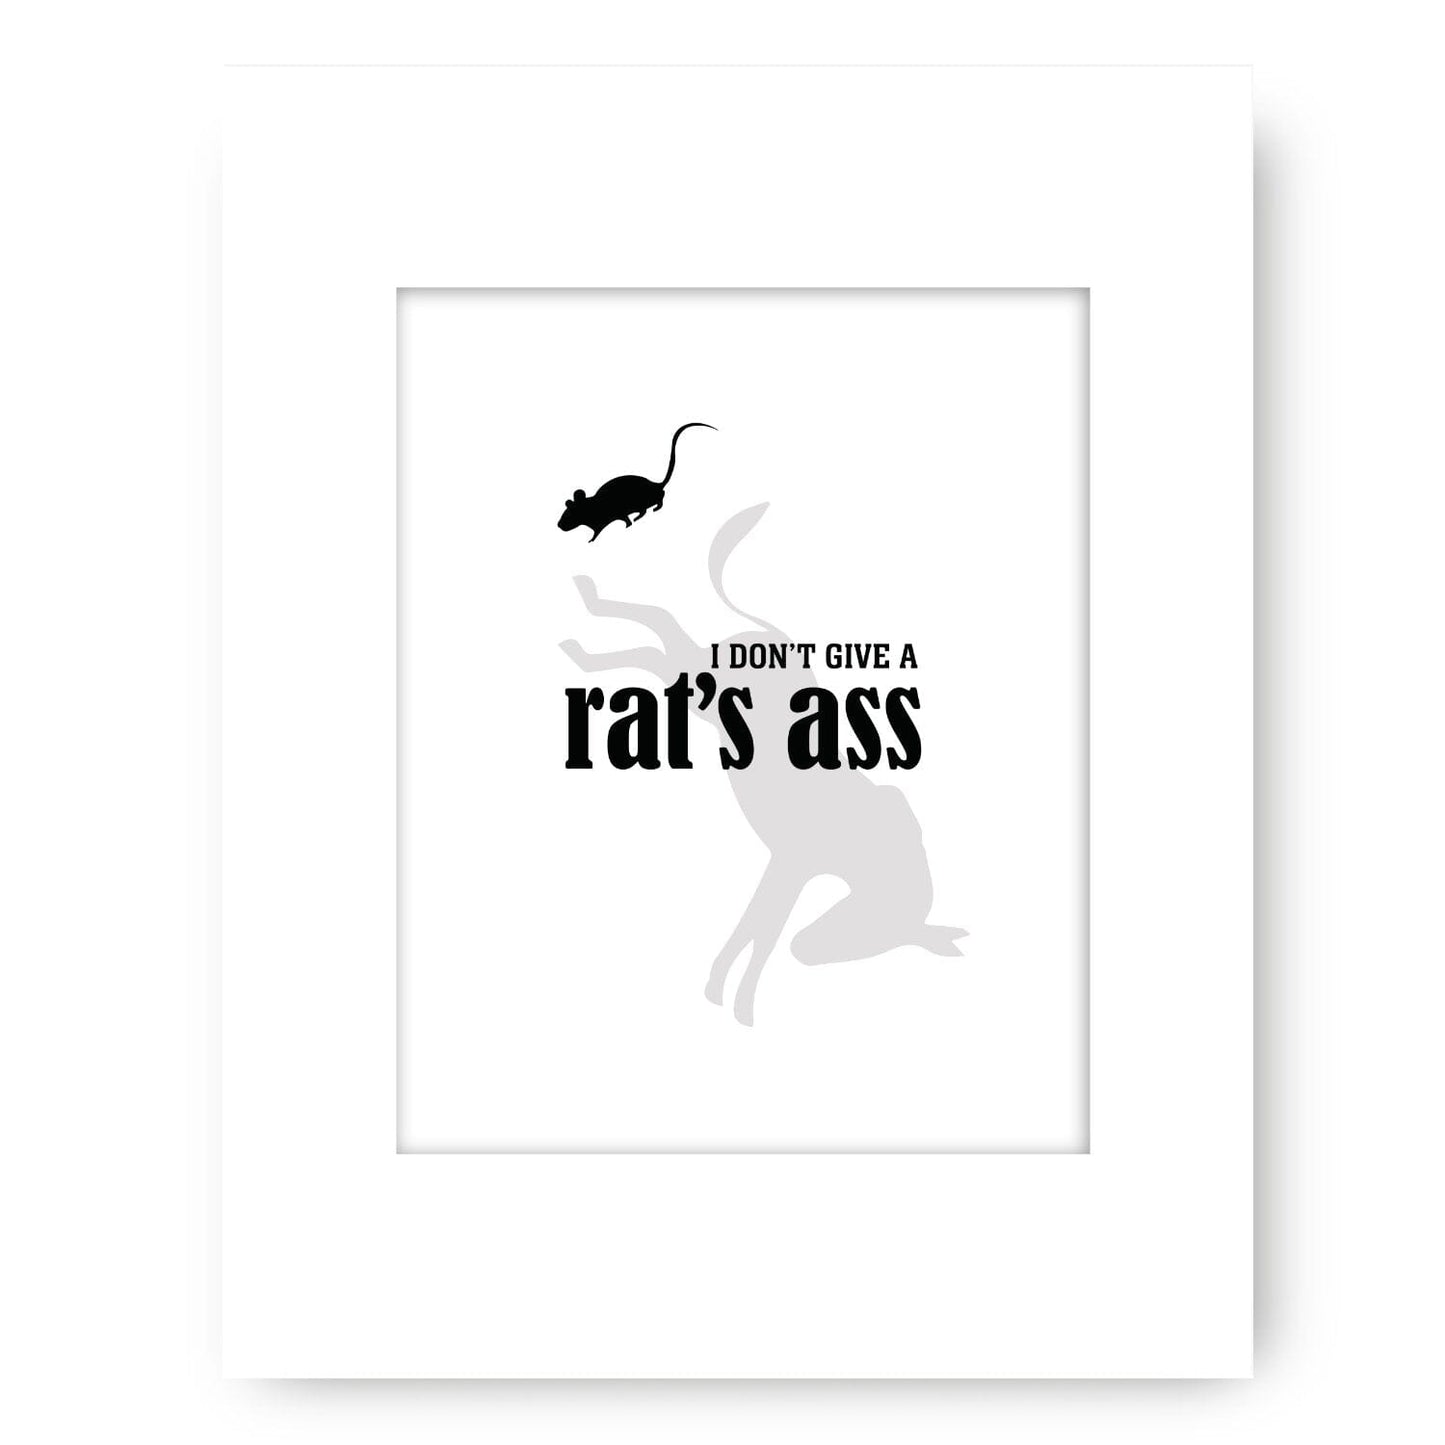 I Don't Give a Rat's Ass - Wise and Witty Sarcastic Print Wise and Wiseass Quotes Song Lyrics Art 8x10 White Matted Print 